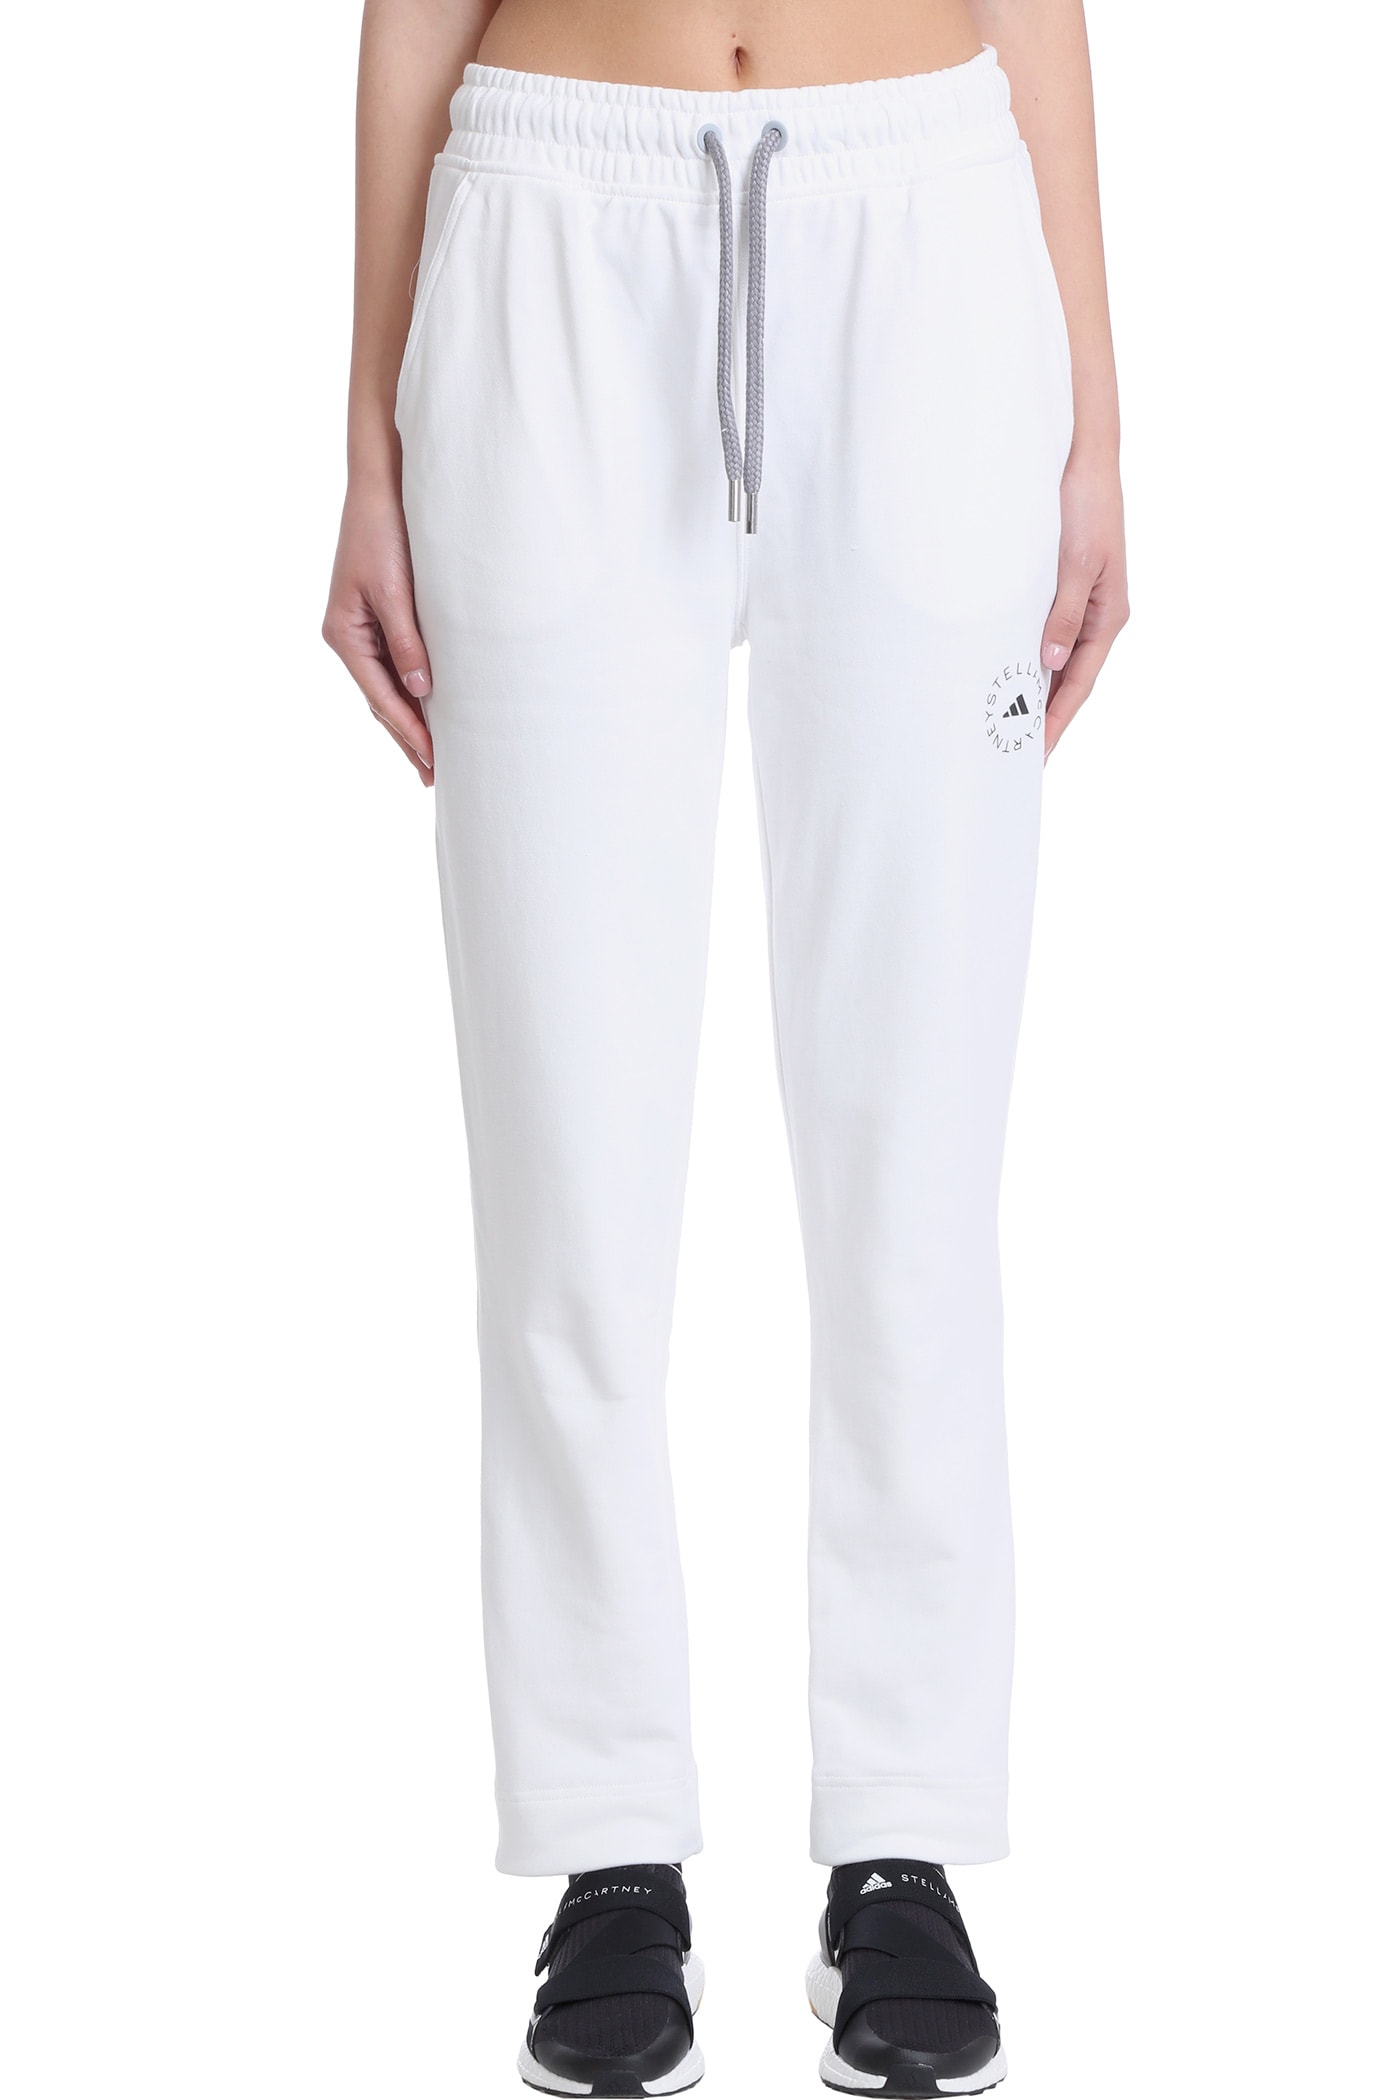 Adidas By Stella Mccartney Pants In White Cotton